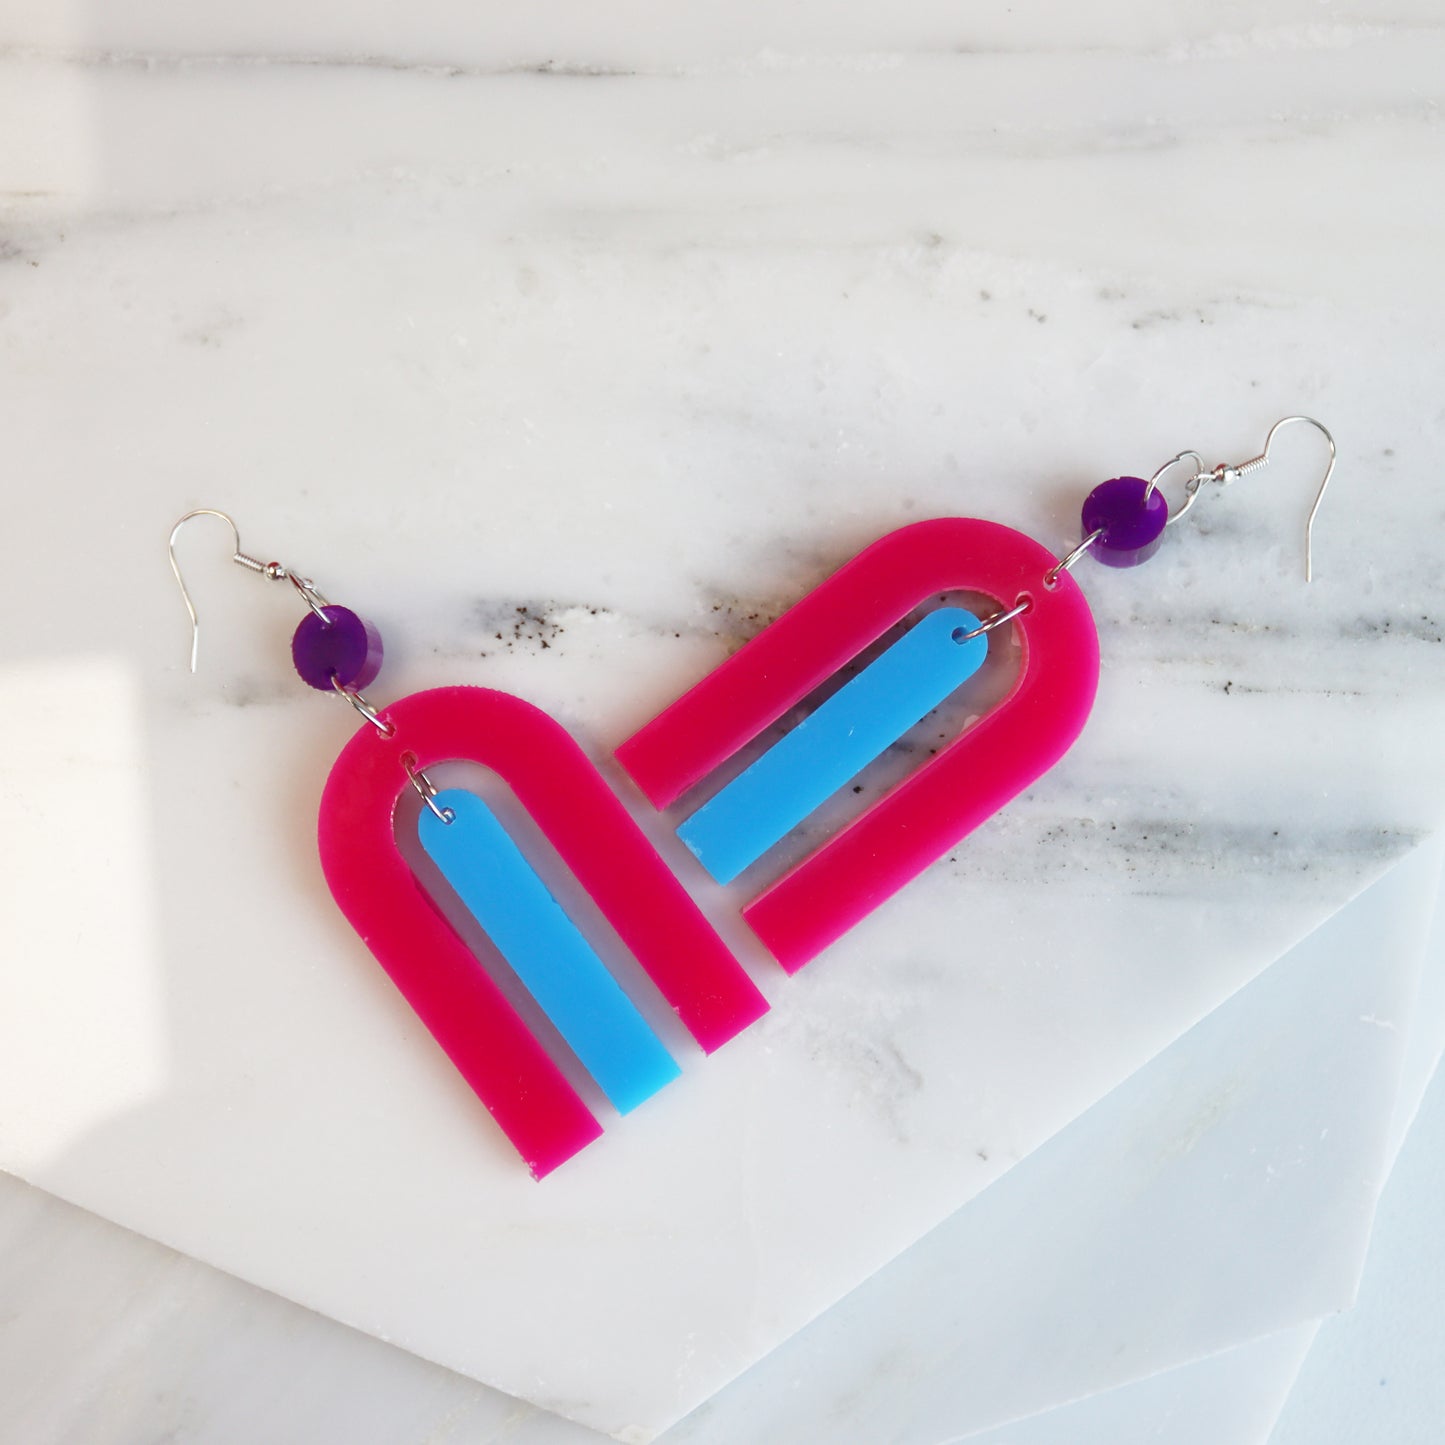 modern bright and colourful geometric arch dangle earrings cut from a purple, pink and turquoise acrylic shown on marble background